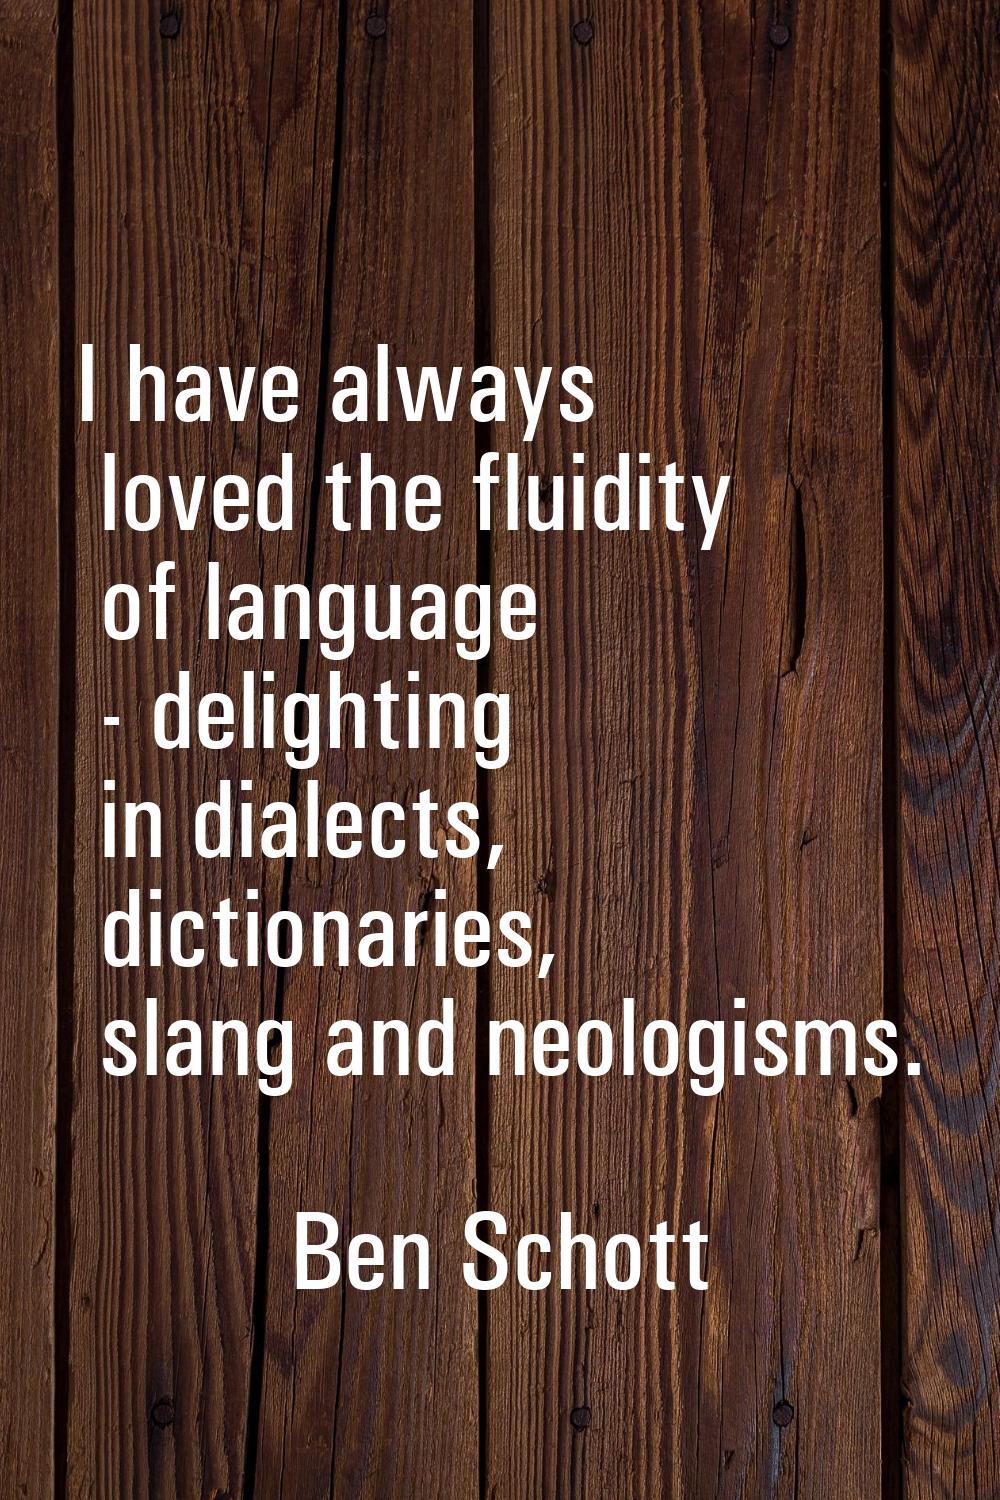 I have always loved the fluidity of language - delighting in dialects, dictionaries, slang and neol